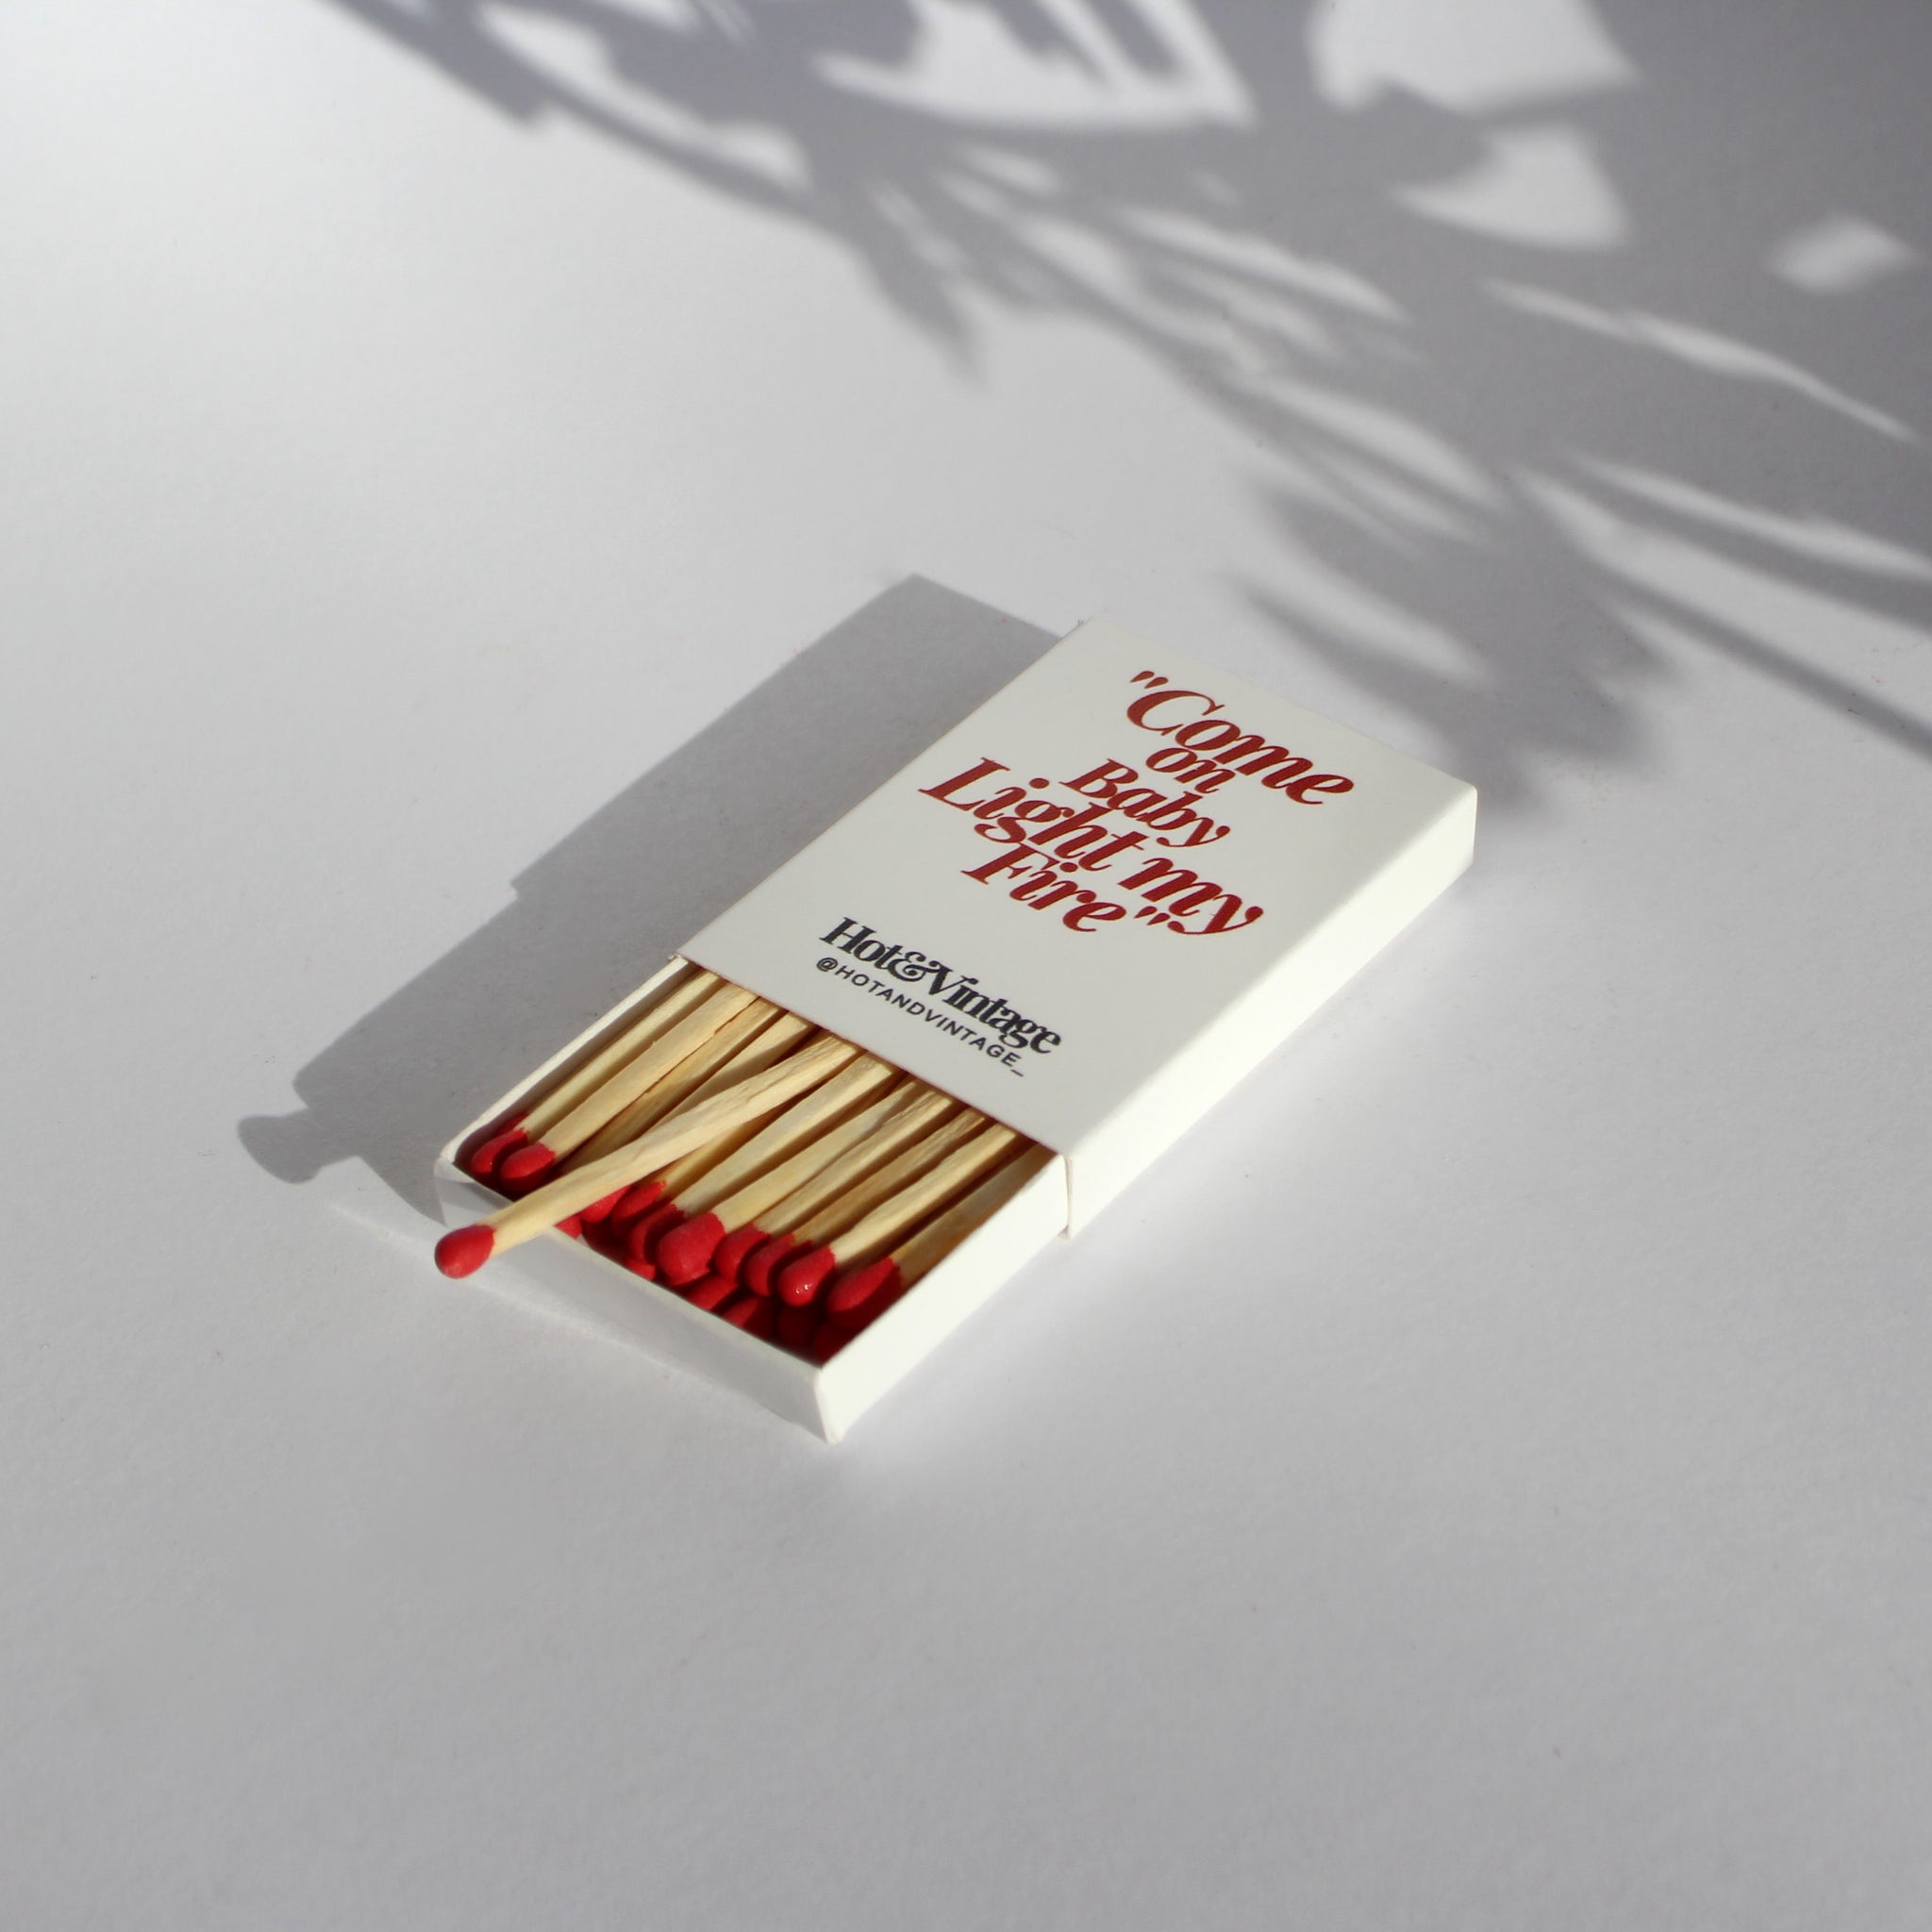 Match Box  “Come on baby light my fire”